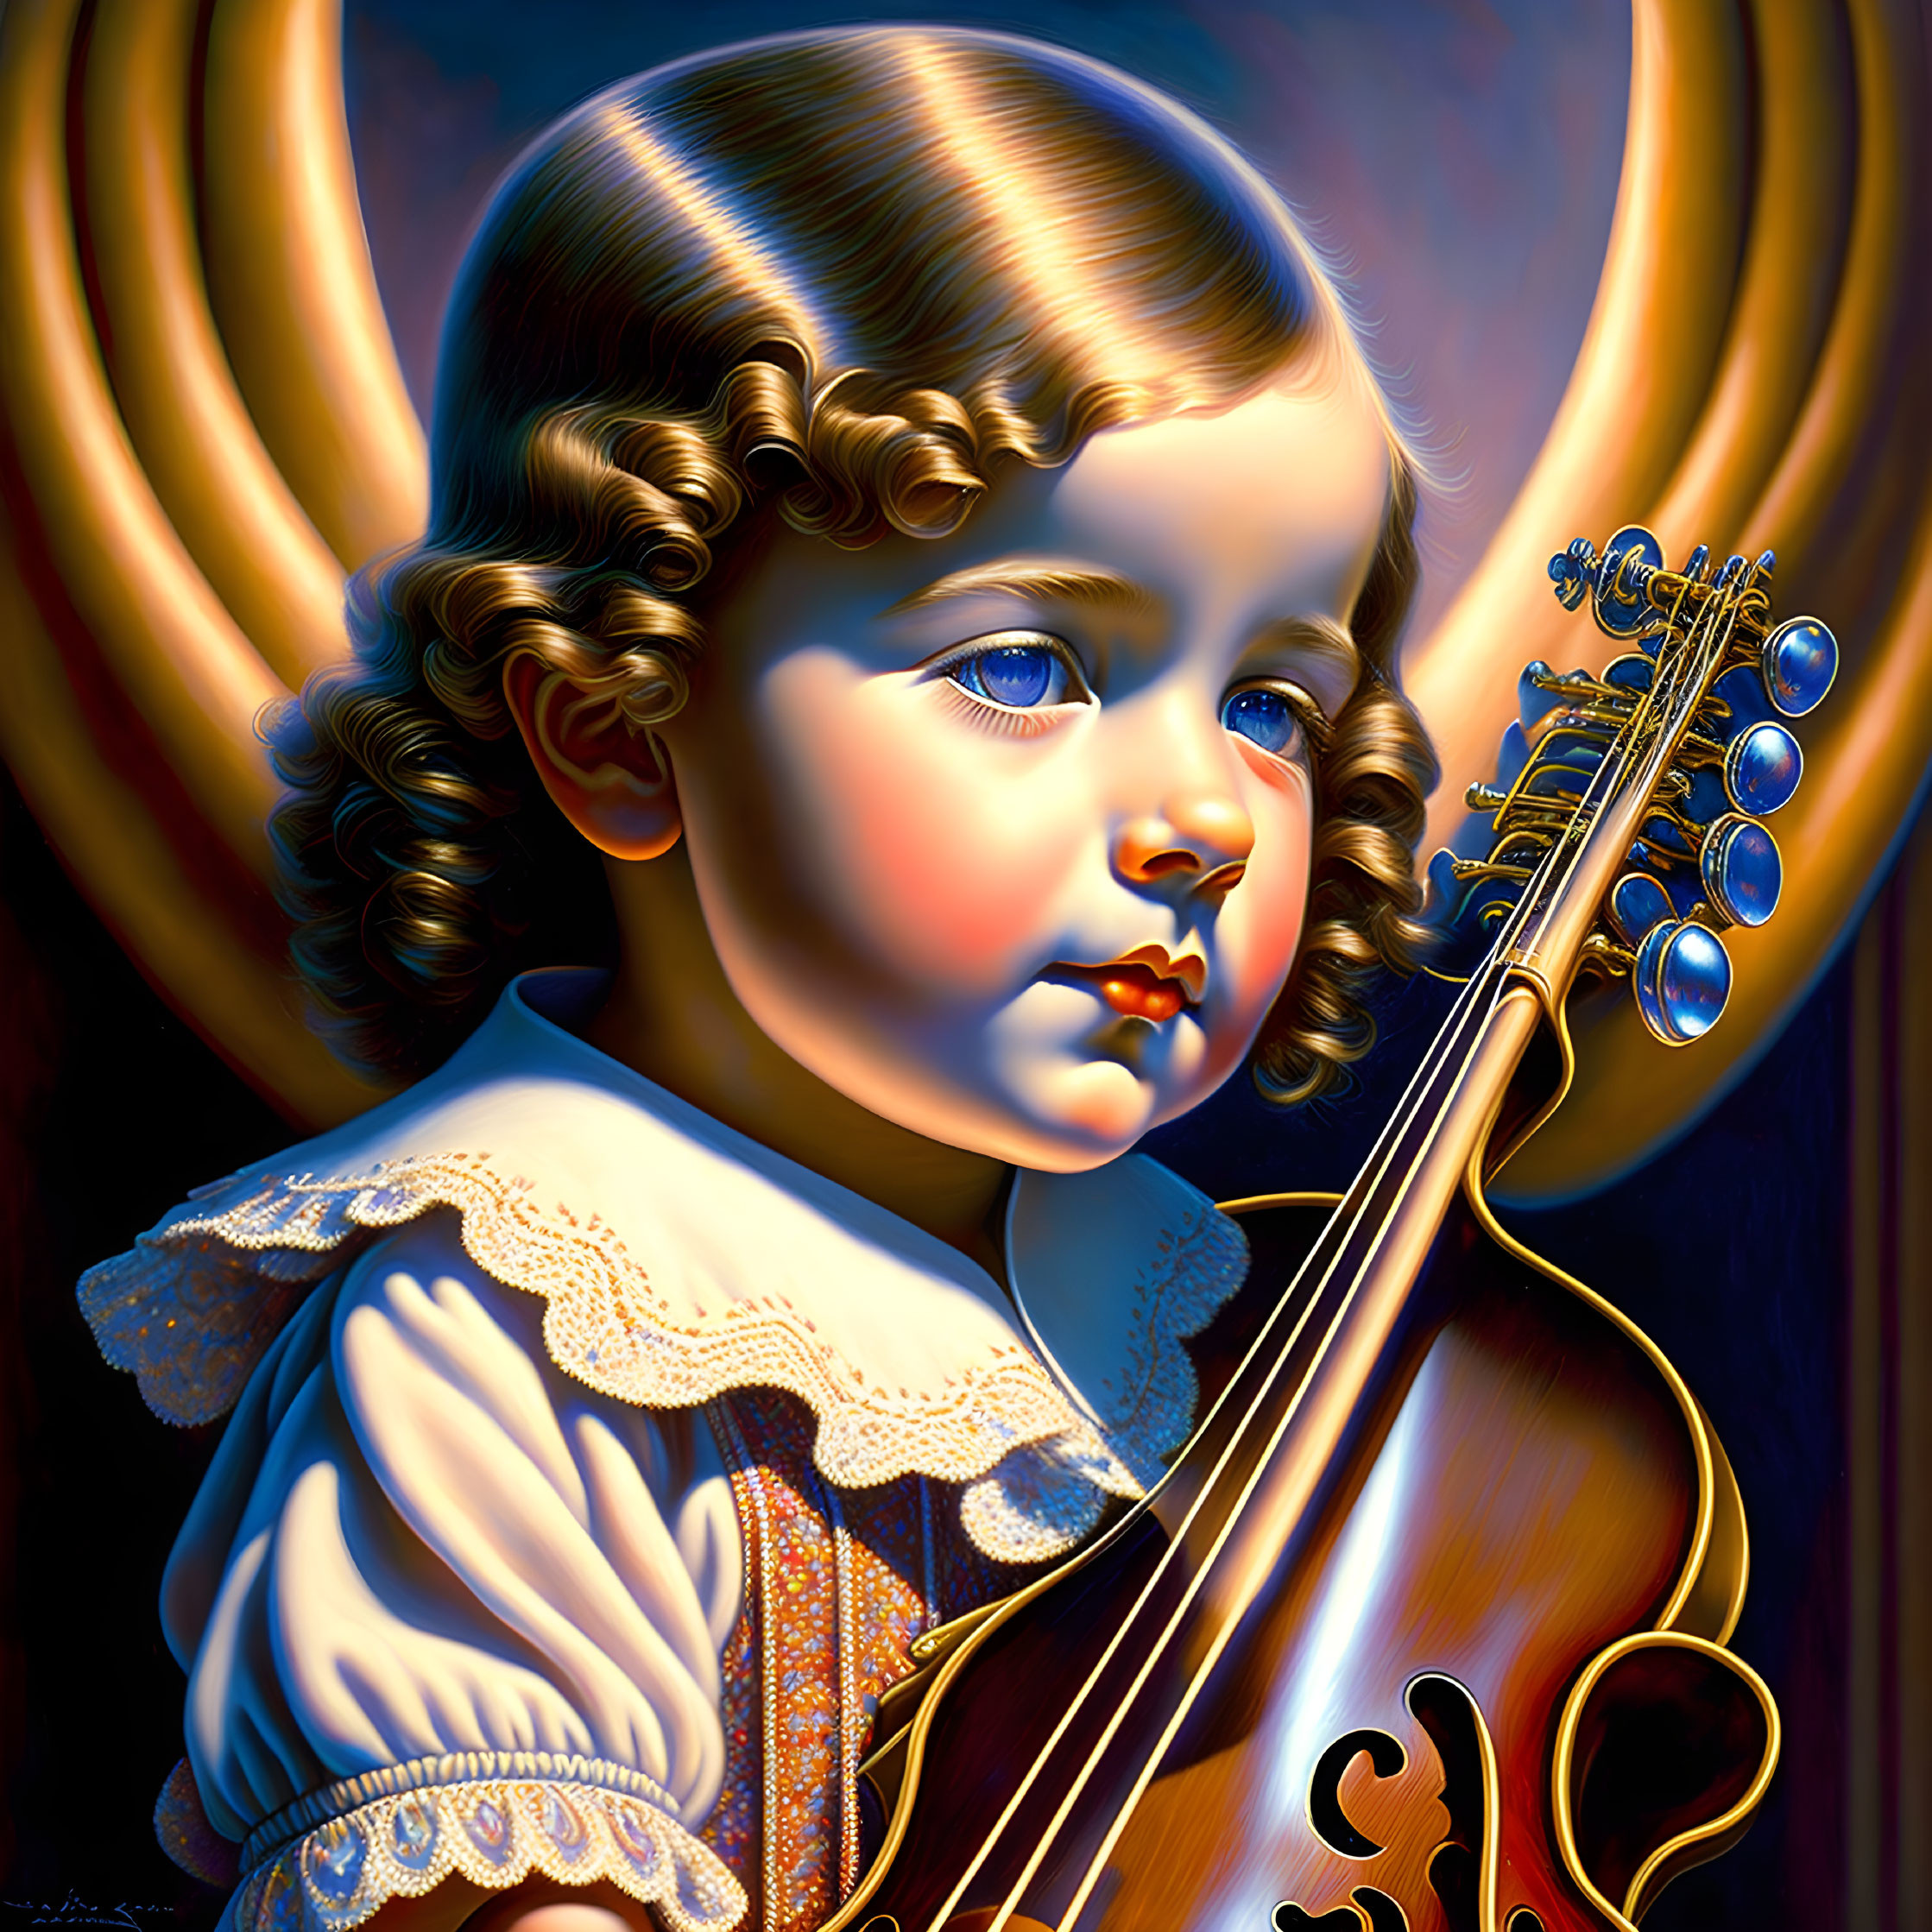 Curly-Haired Child Holding Violin and Bow on Golden Background